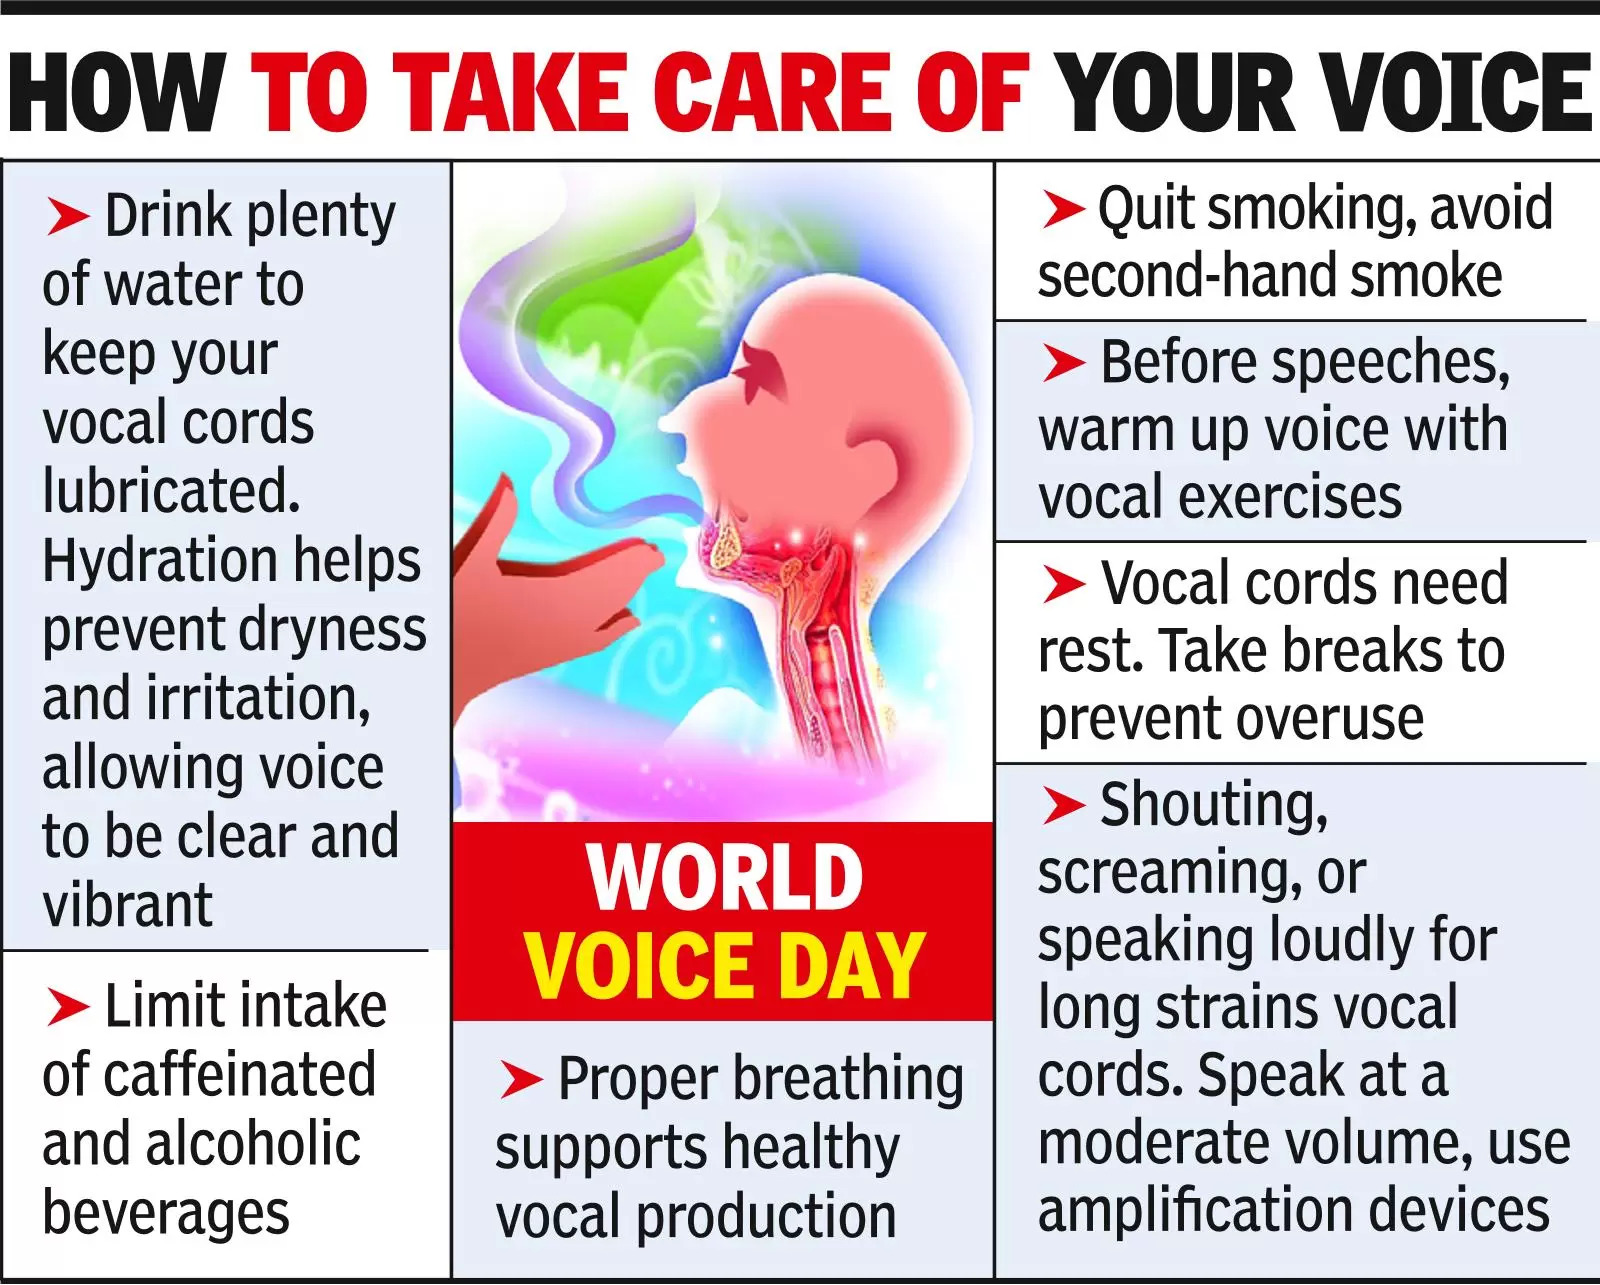 Choked & muffled: City govt centre restores your voices